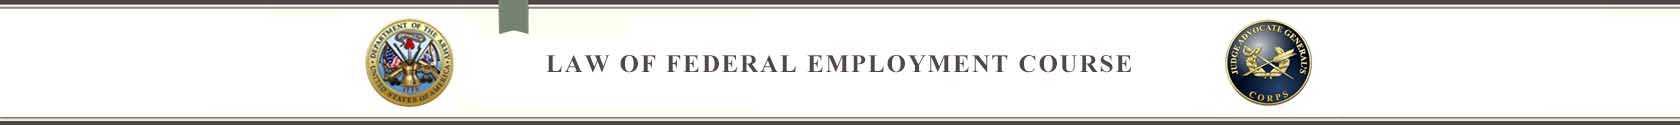 Law of Federal Employment Banner